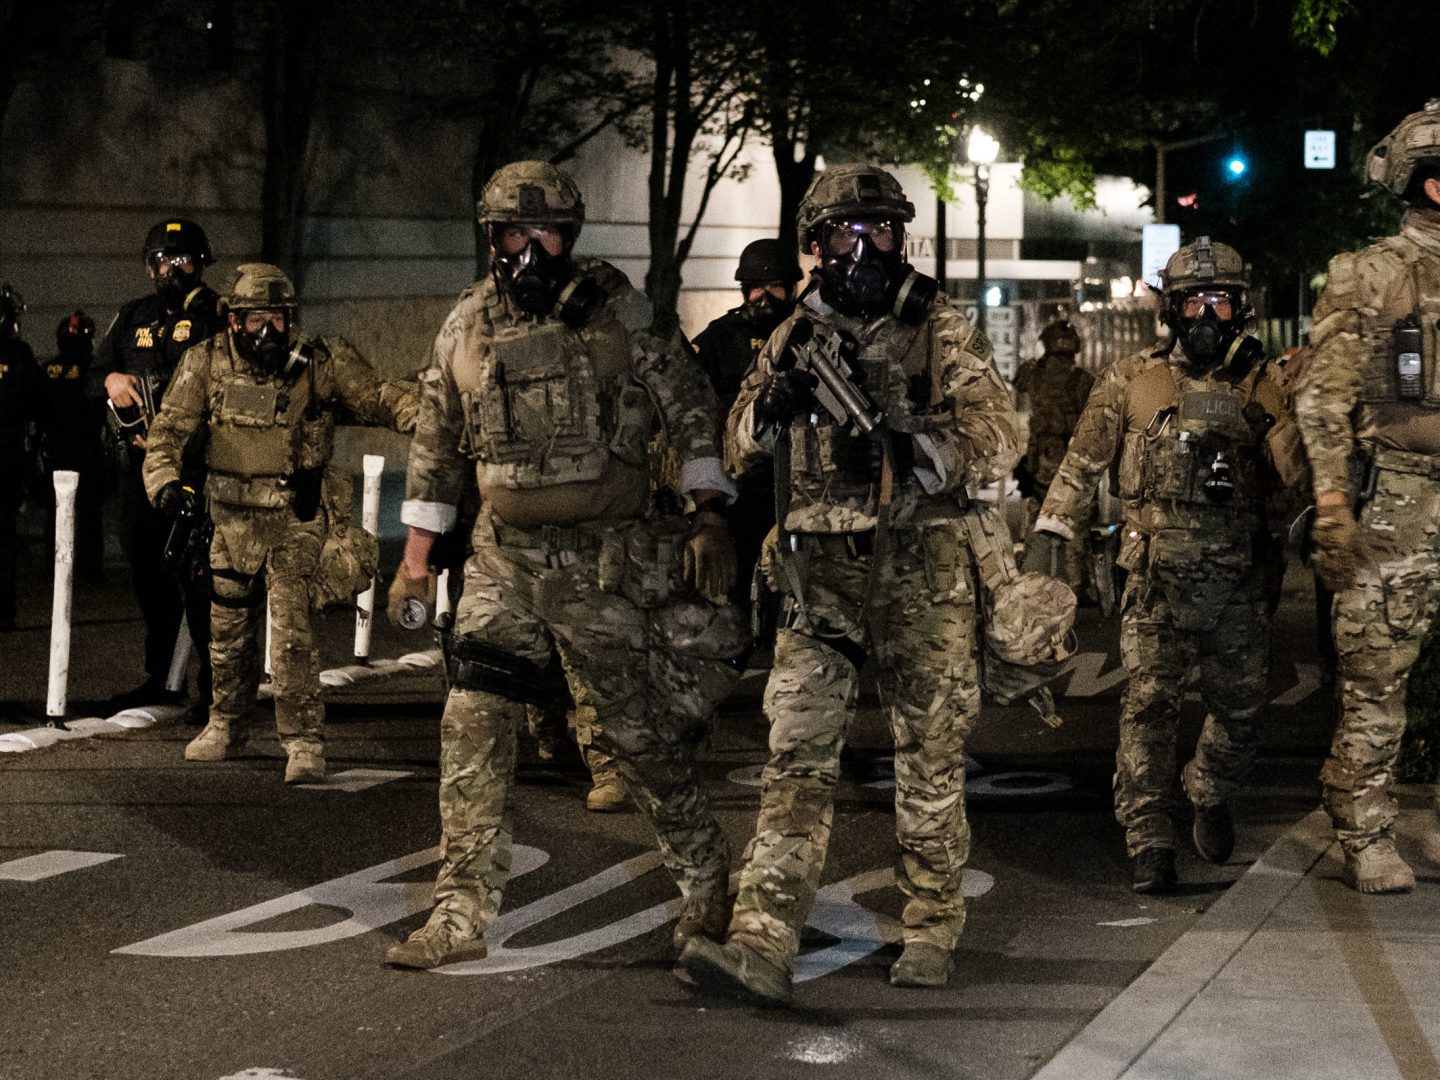 Federal officers prepare to disperse the crowd of protesters outside the Multnomah County Justice Center on July 17 in Portland. The use of federal agents has only made a bad situation worse, state and local officials told NPR.